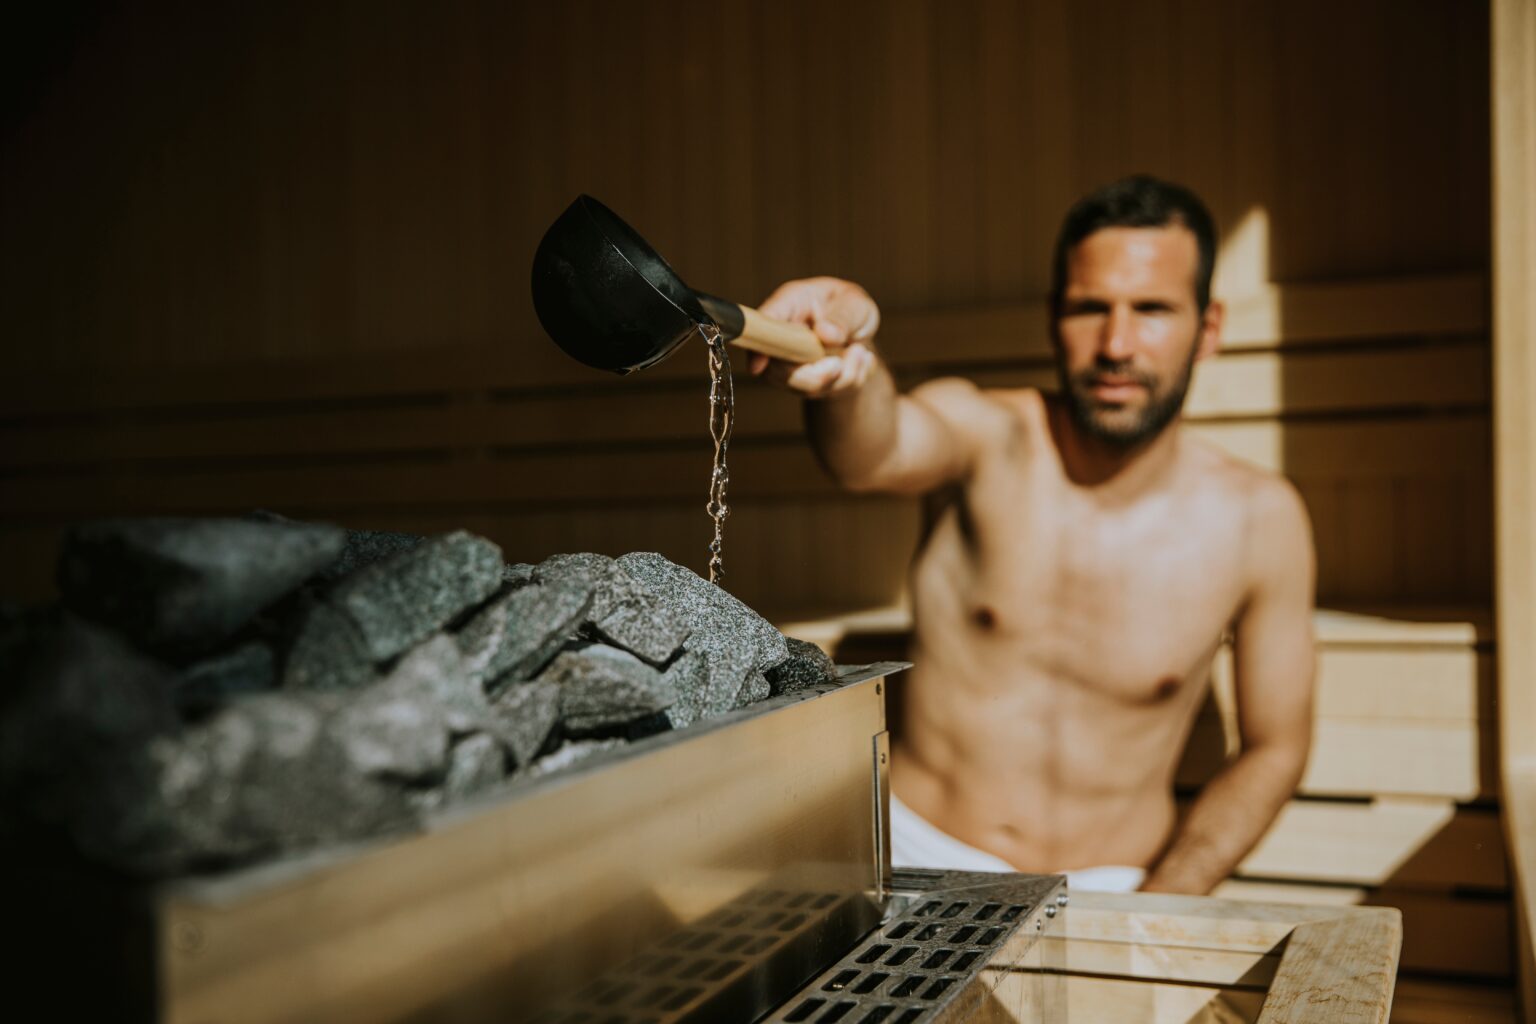 How to take a sauna properly and healthily?